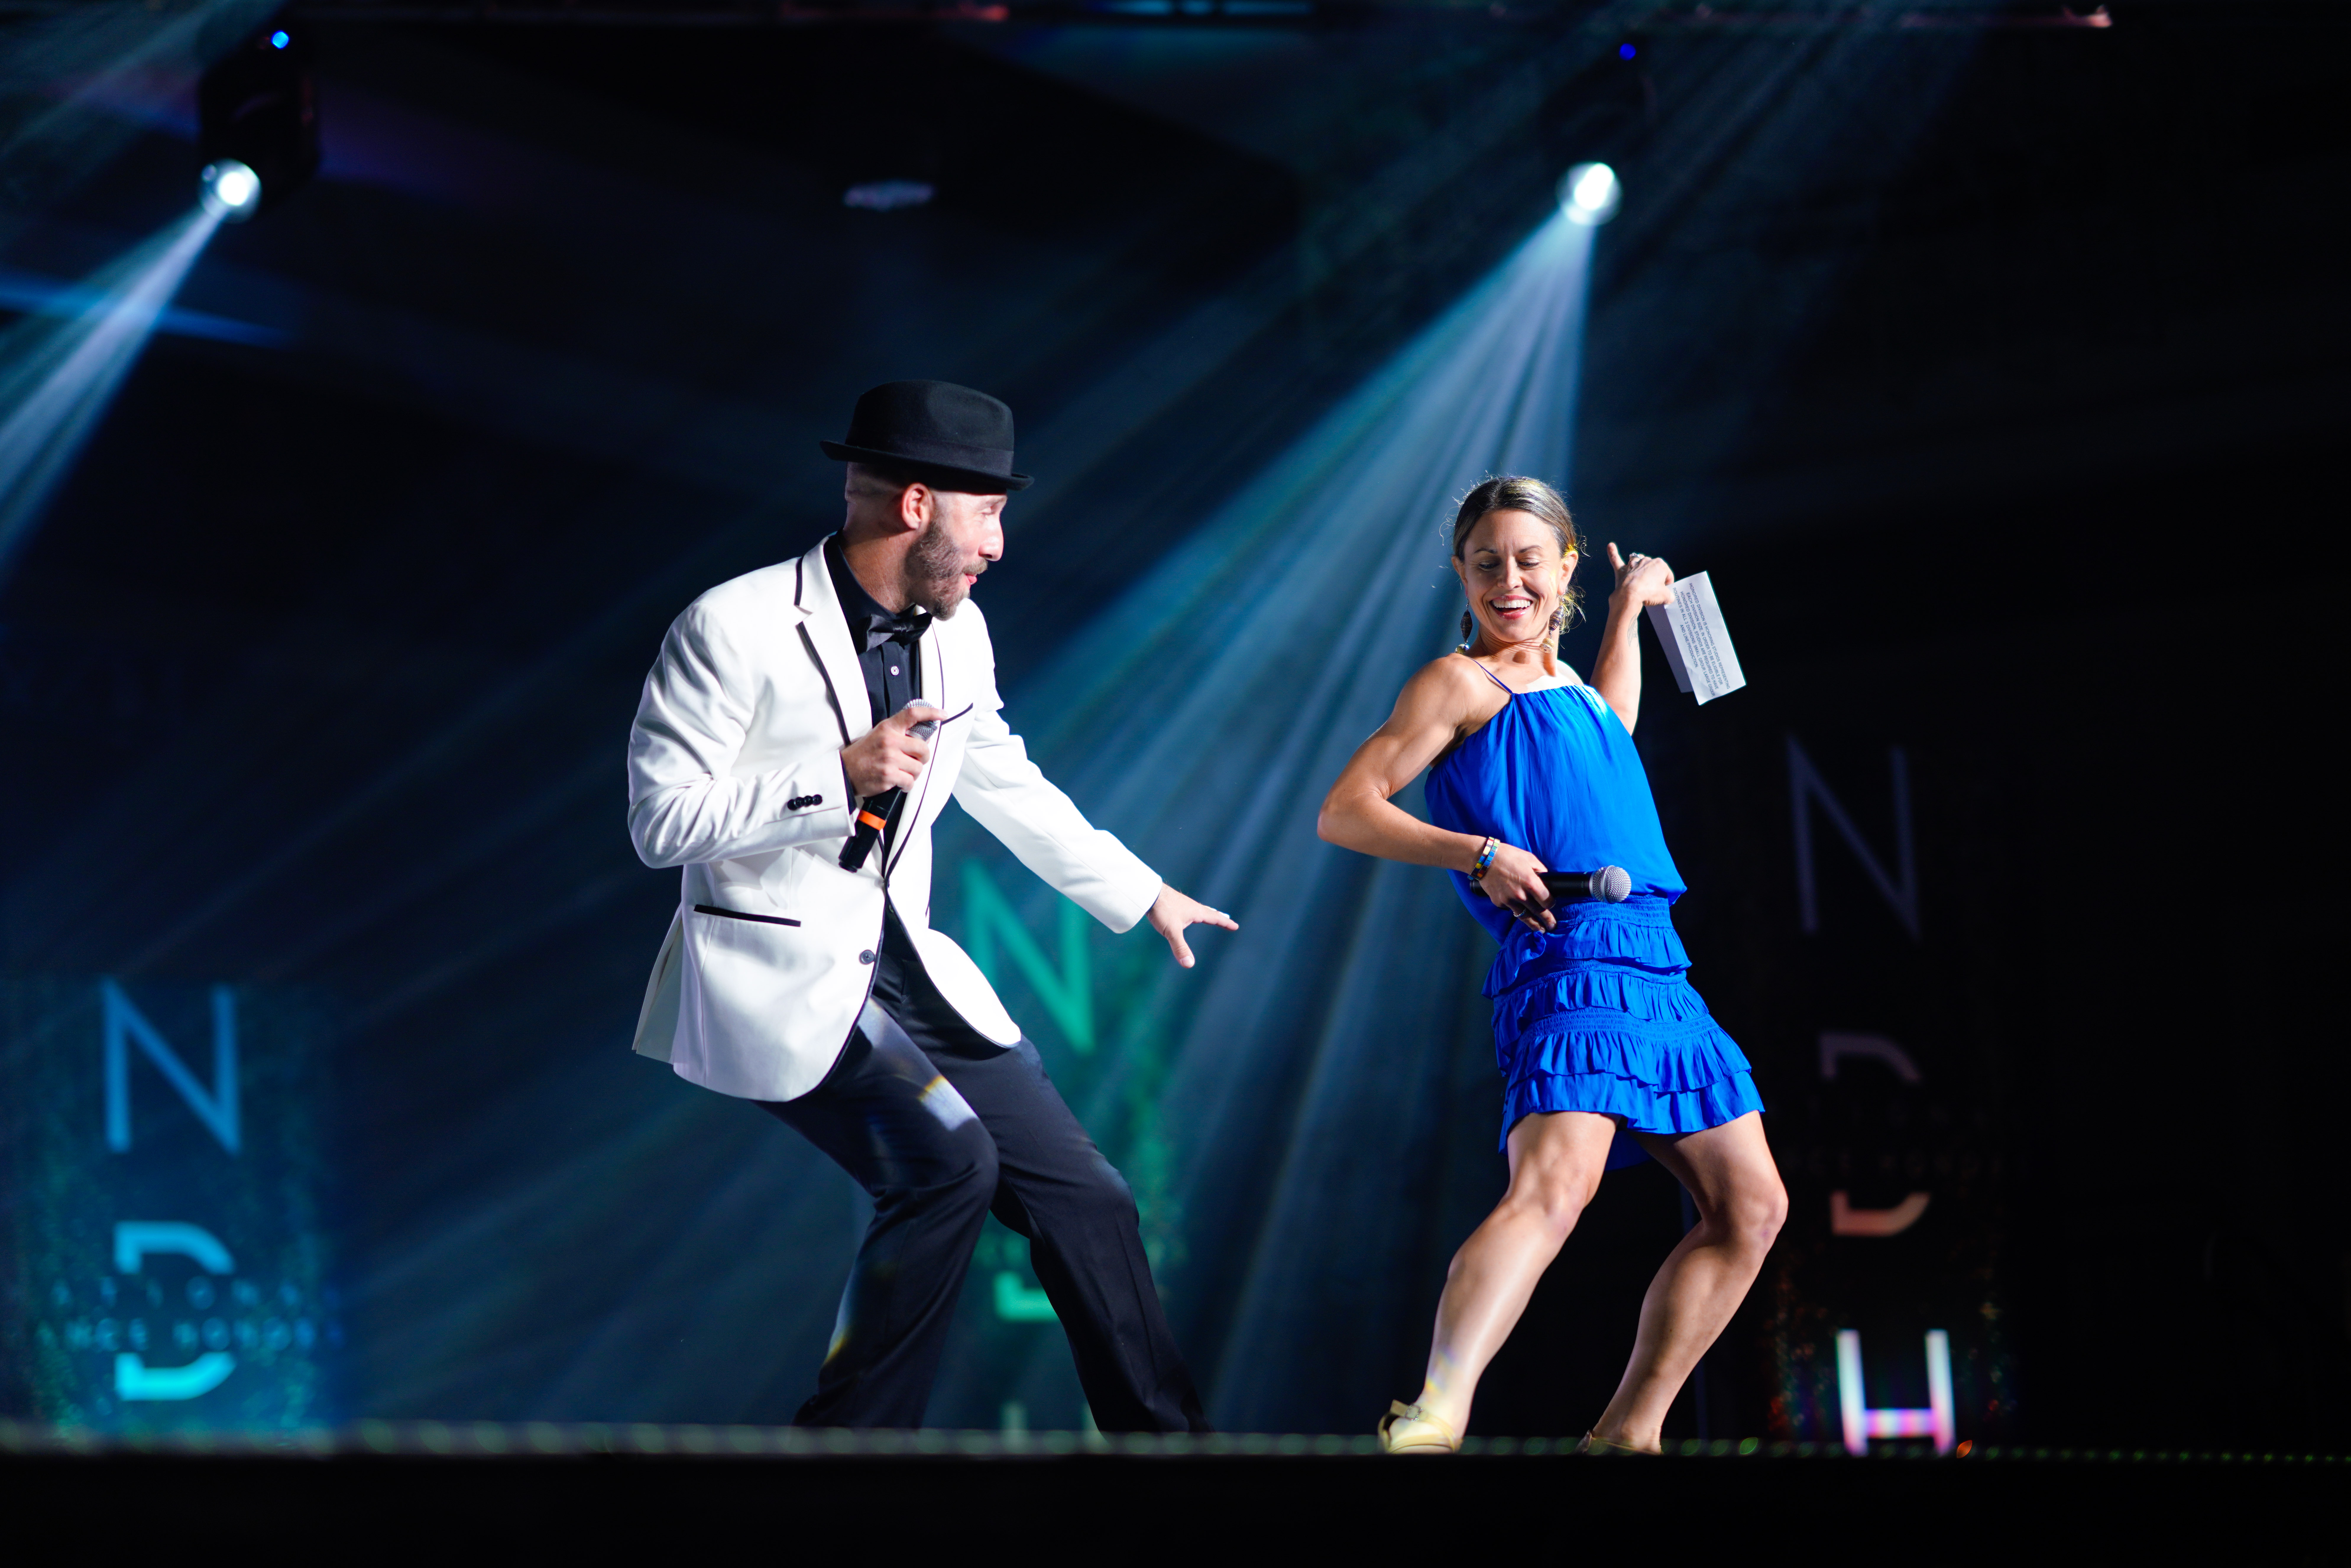 Adrenaline Faculty Members Nick Bass and Caroline Lewis Jones dance together onstage holding microphones. Bass wears a white sport coat and black top hat, and Lewis Jones wears a royal blue dress with a ruffled bottom and heels.